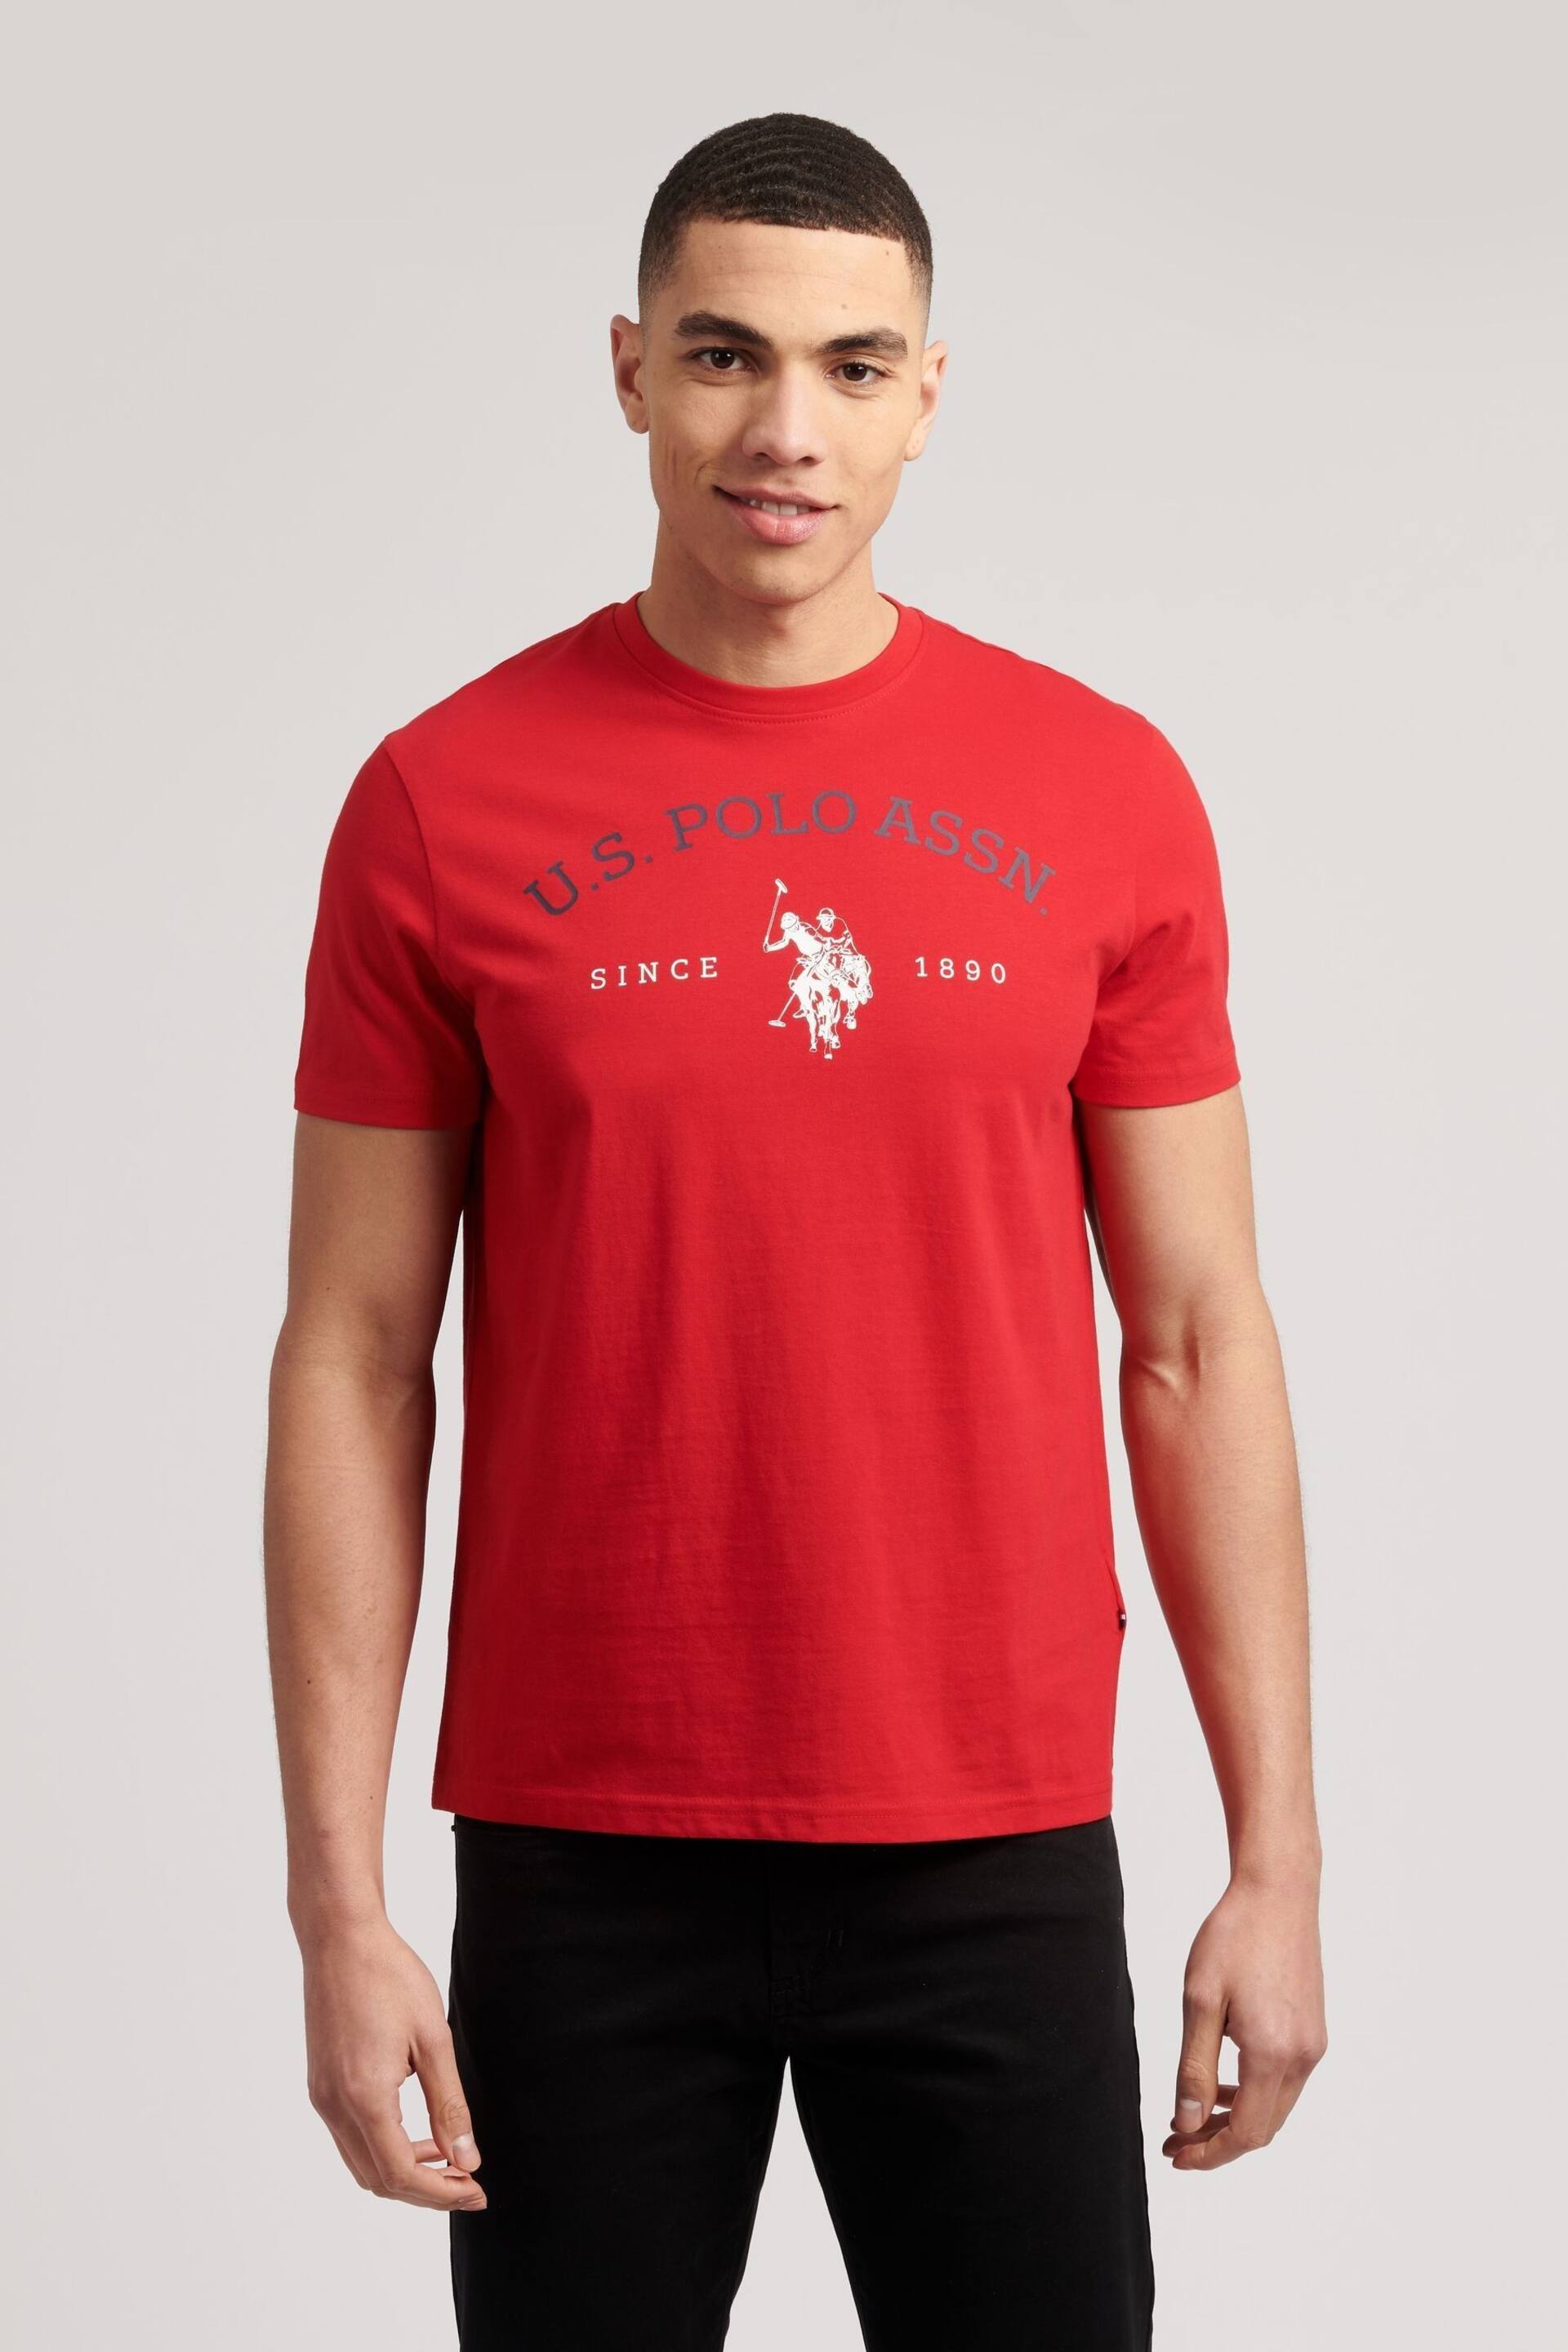 U.S. Polo Assn. Graphic T-Shirt - Image 1 of 5